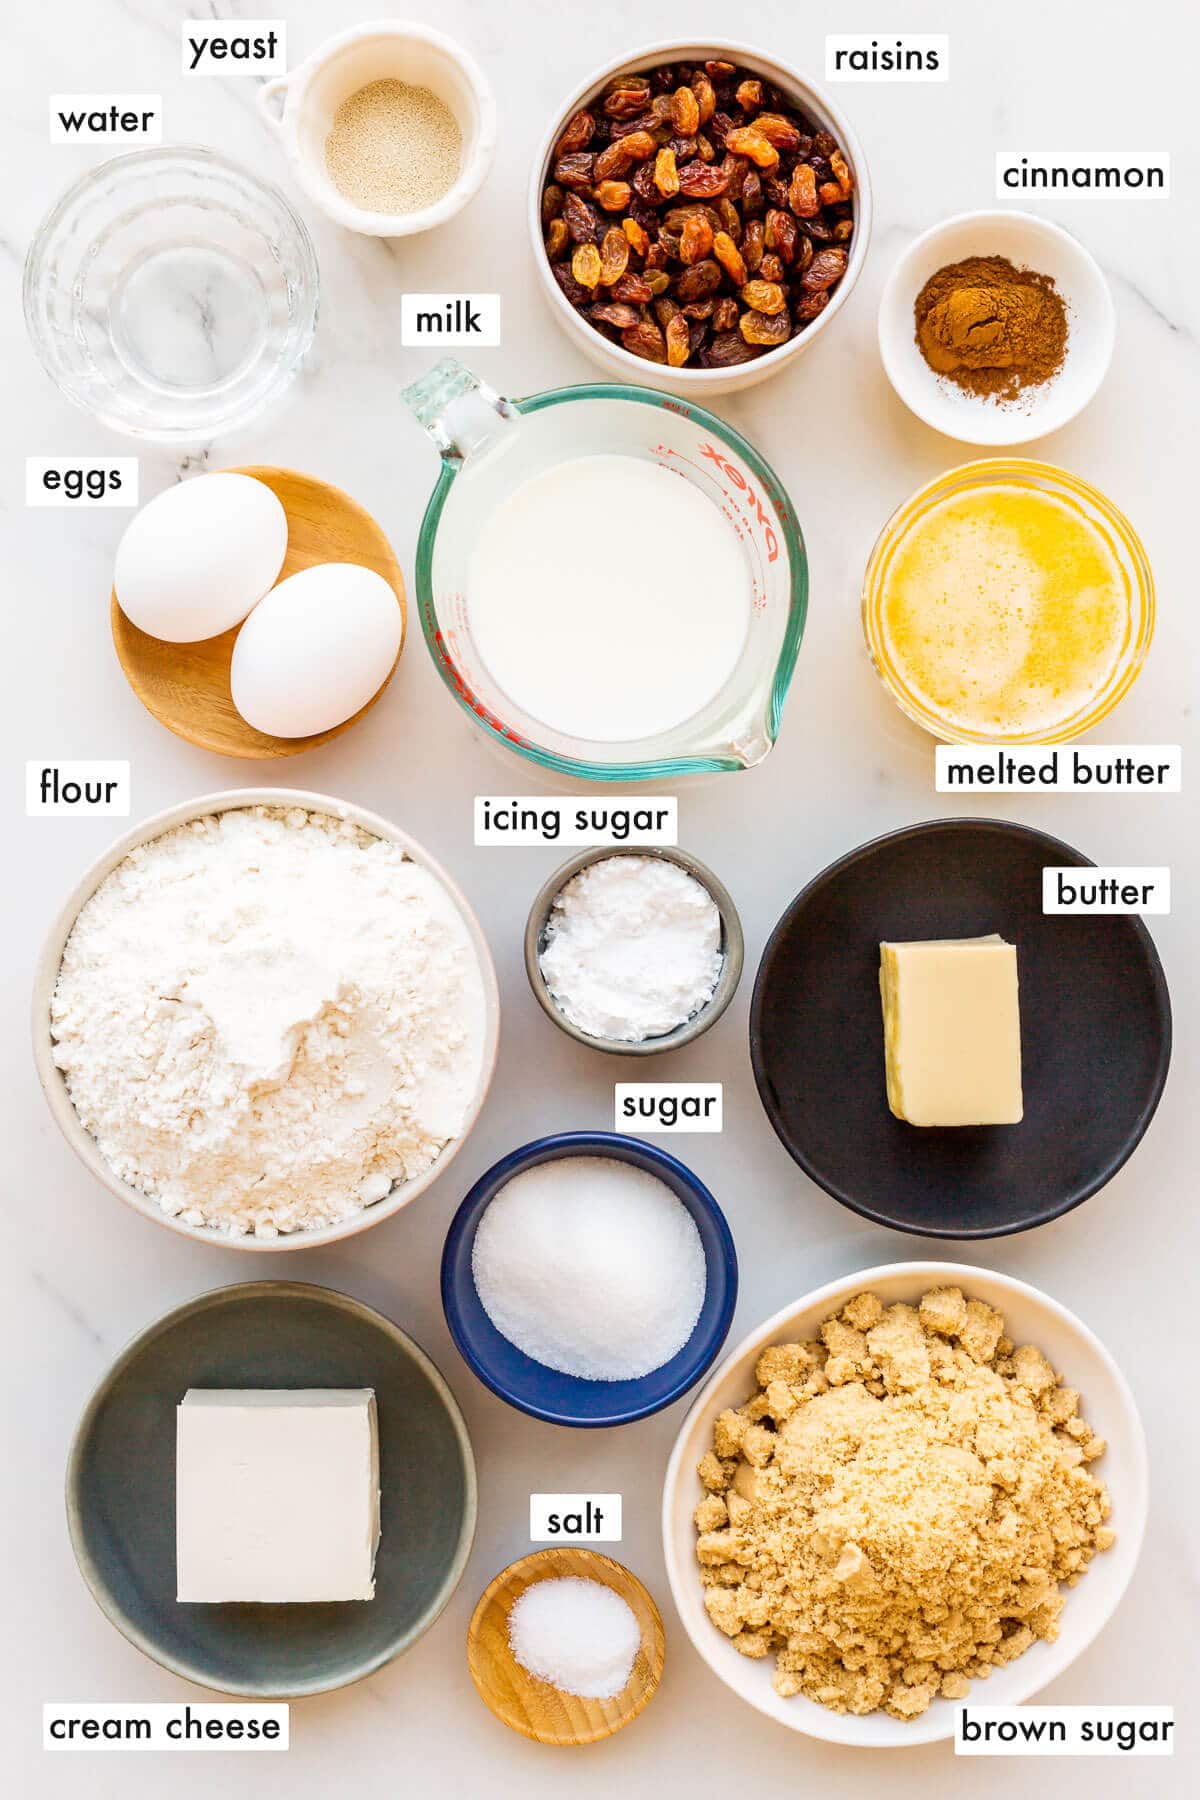 Ingredients to make cinnamon rolls with raisins measured and ready to be mixed.